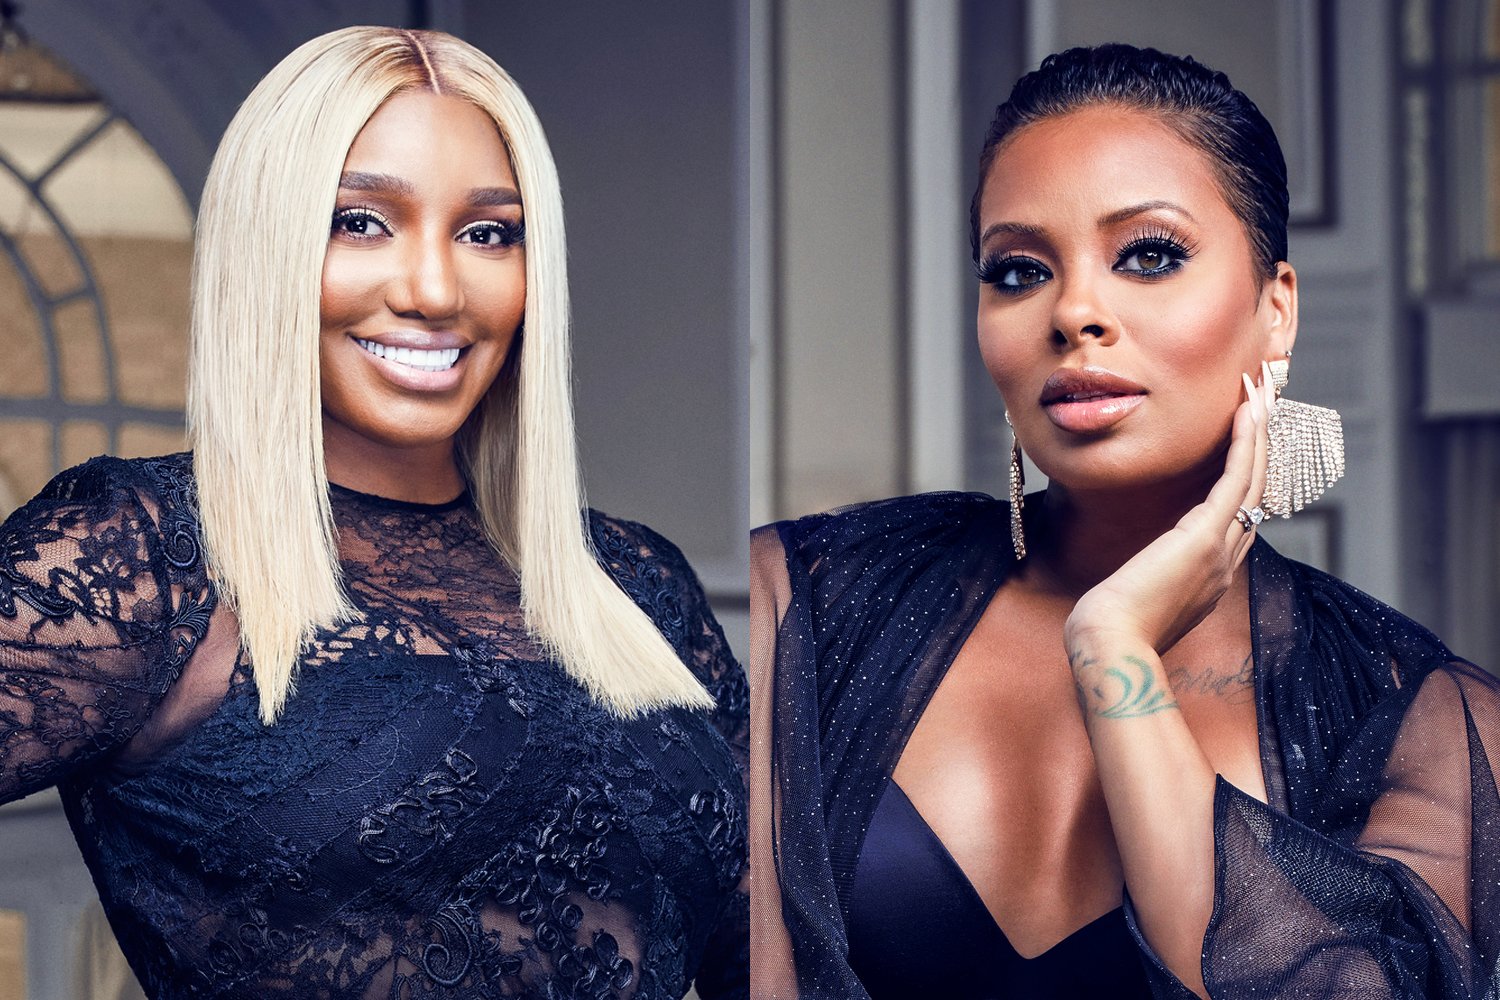 ‘RHOA’: Eva Marcille Drops Feud With Nene Leakes, ‘Roots for Her’ After ‘Housewives’ Exit